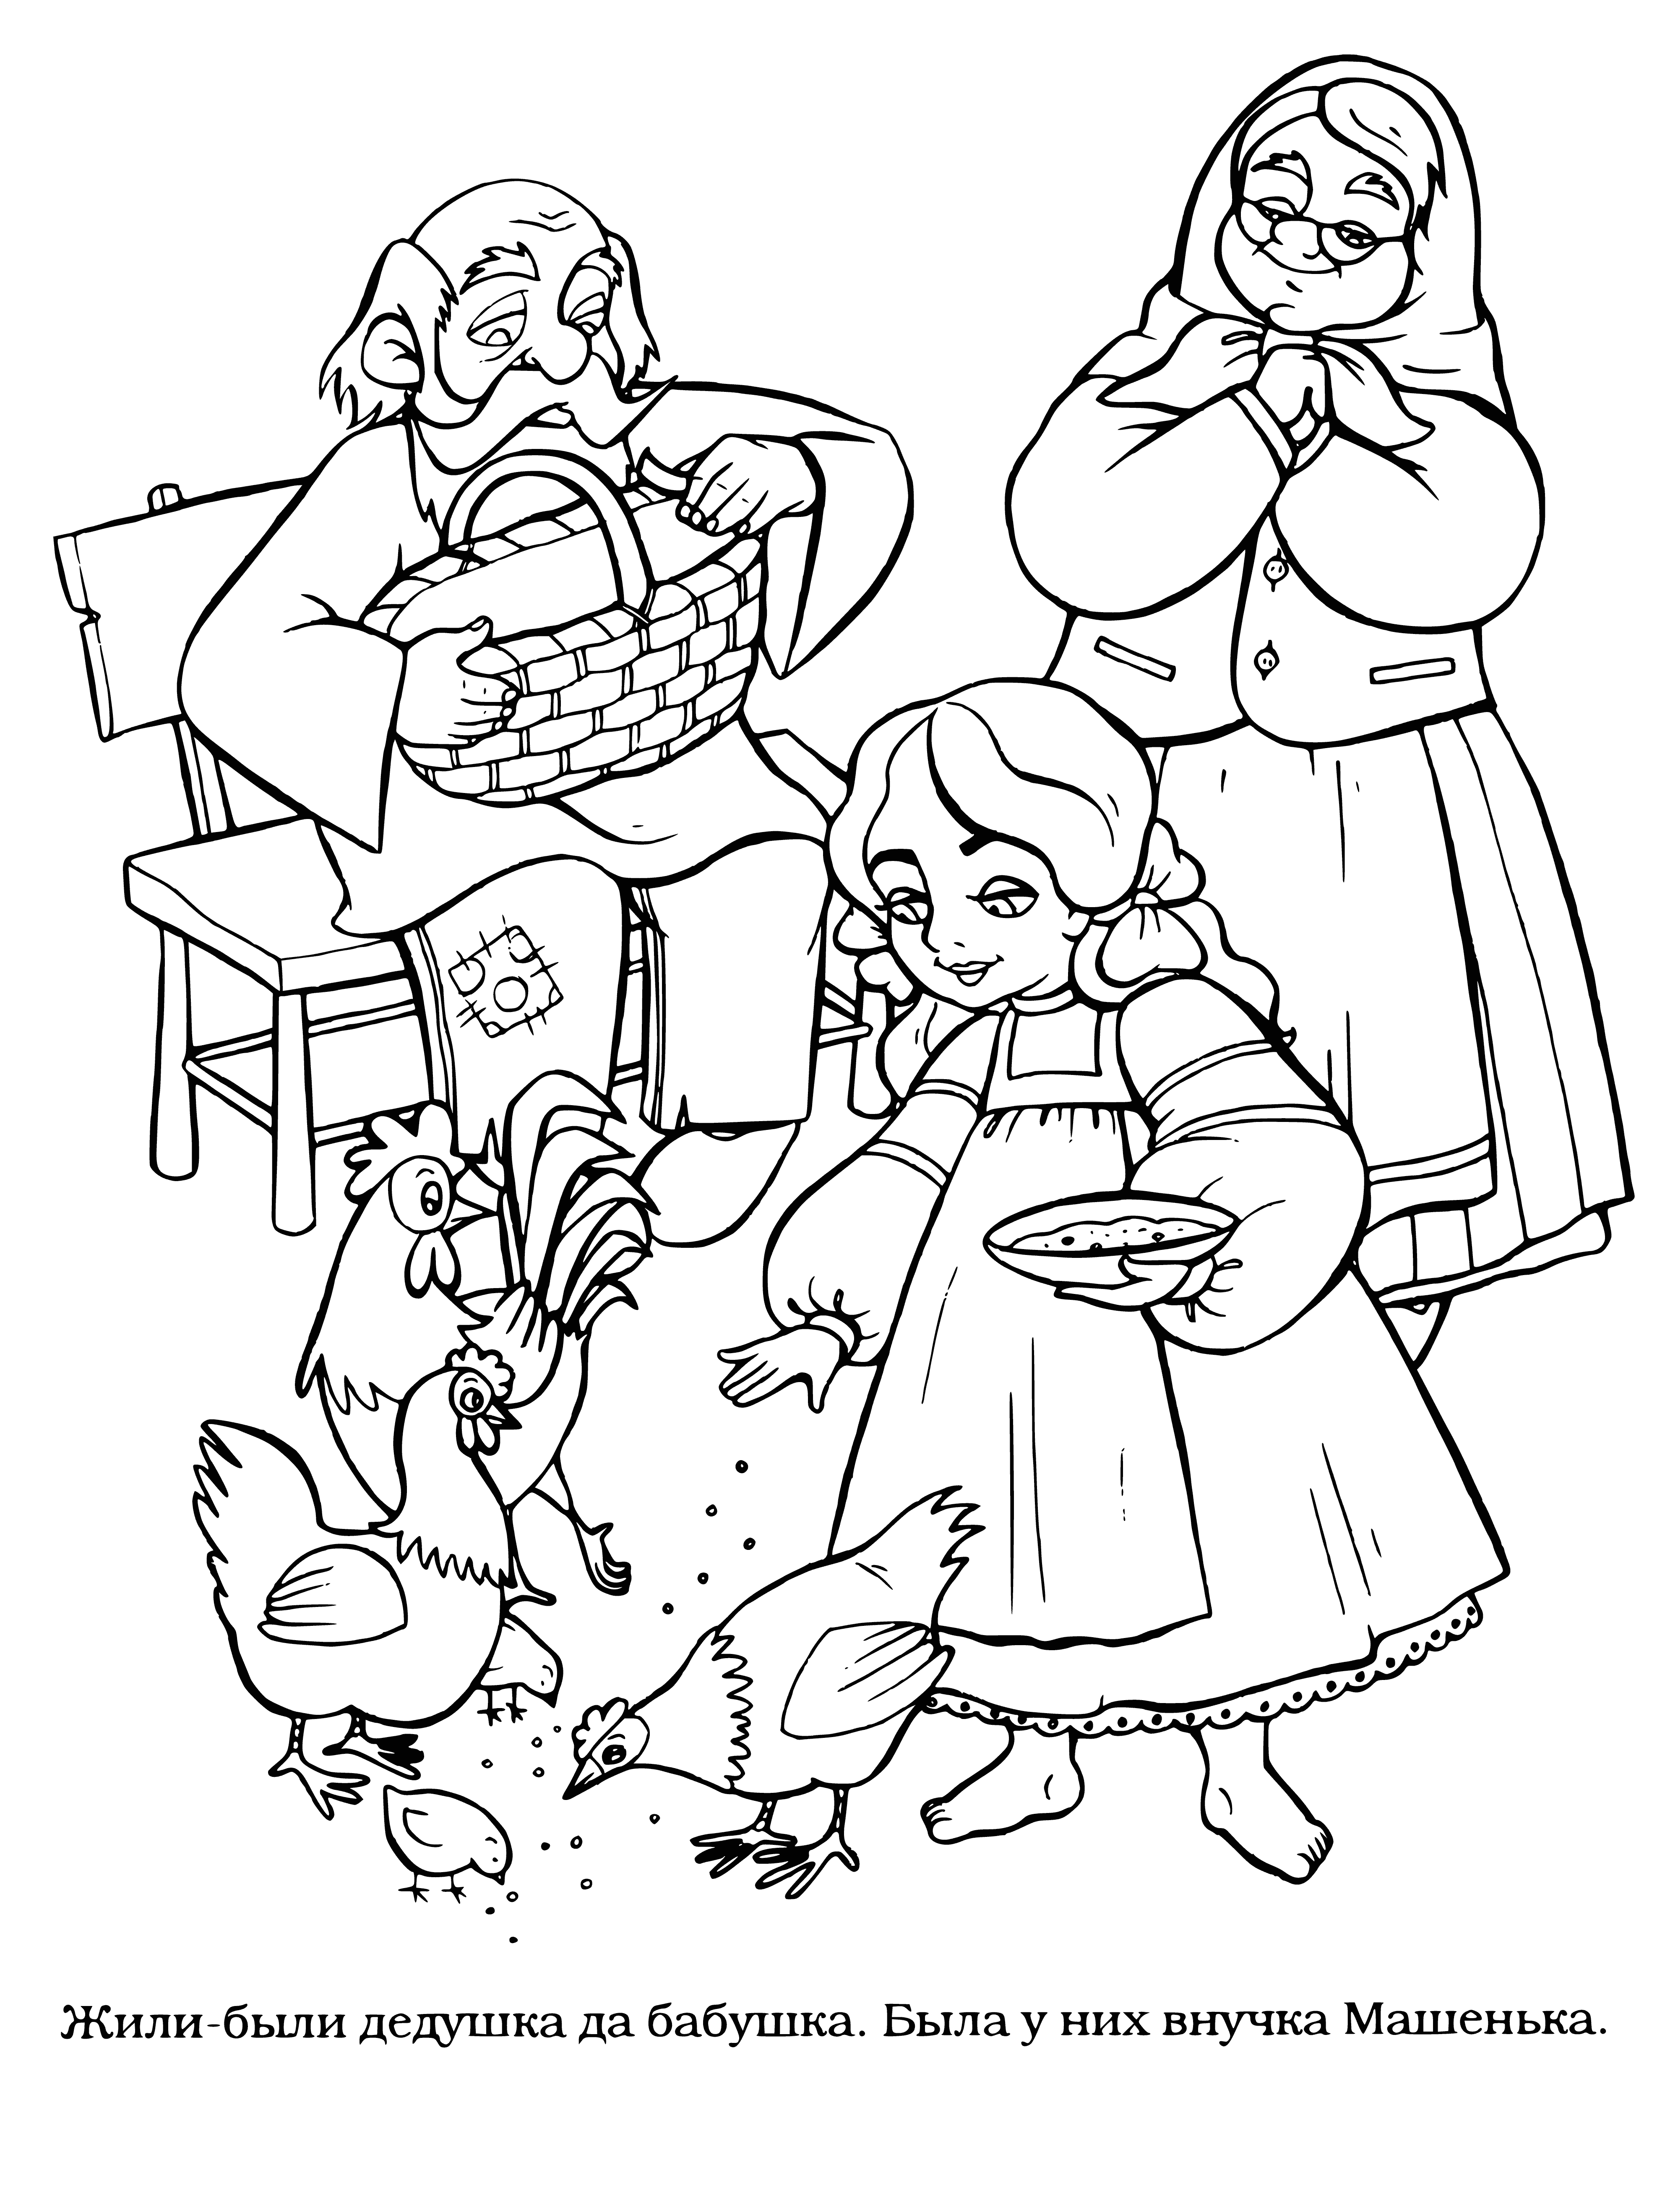 coloring page: A girl in Russian dress sits on a tree trunk, looking at a book while a bird perches nearby.